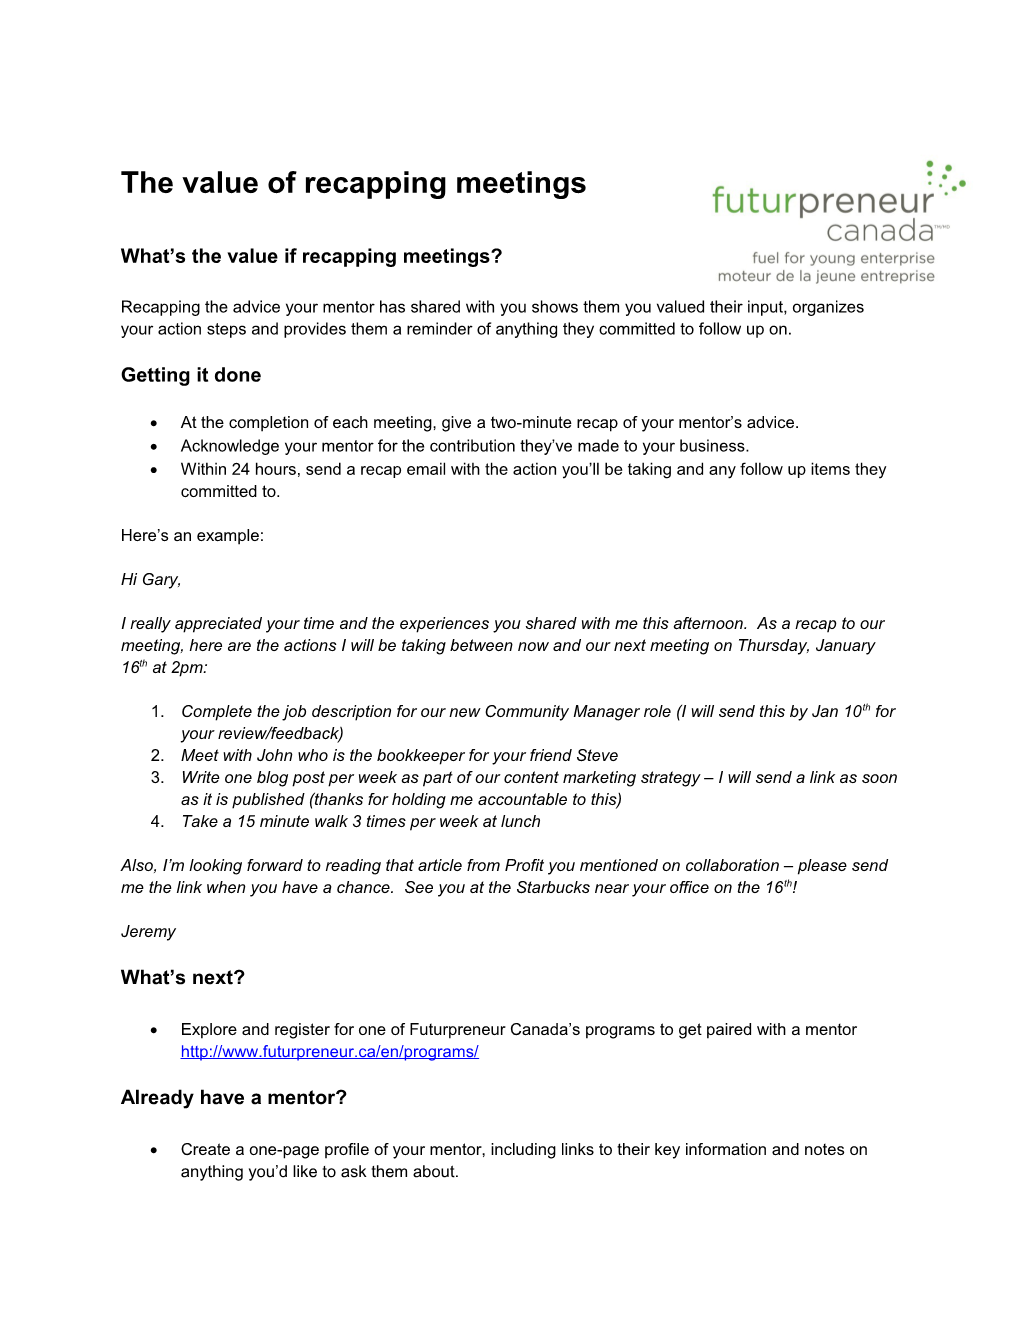 The Value of Recapping Meetings